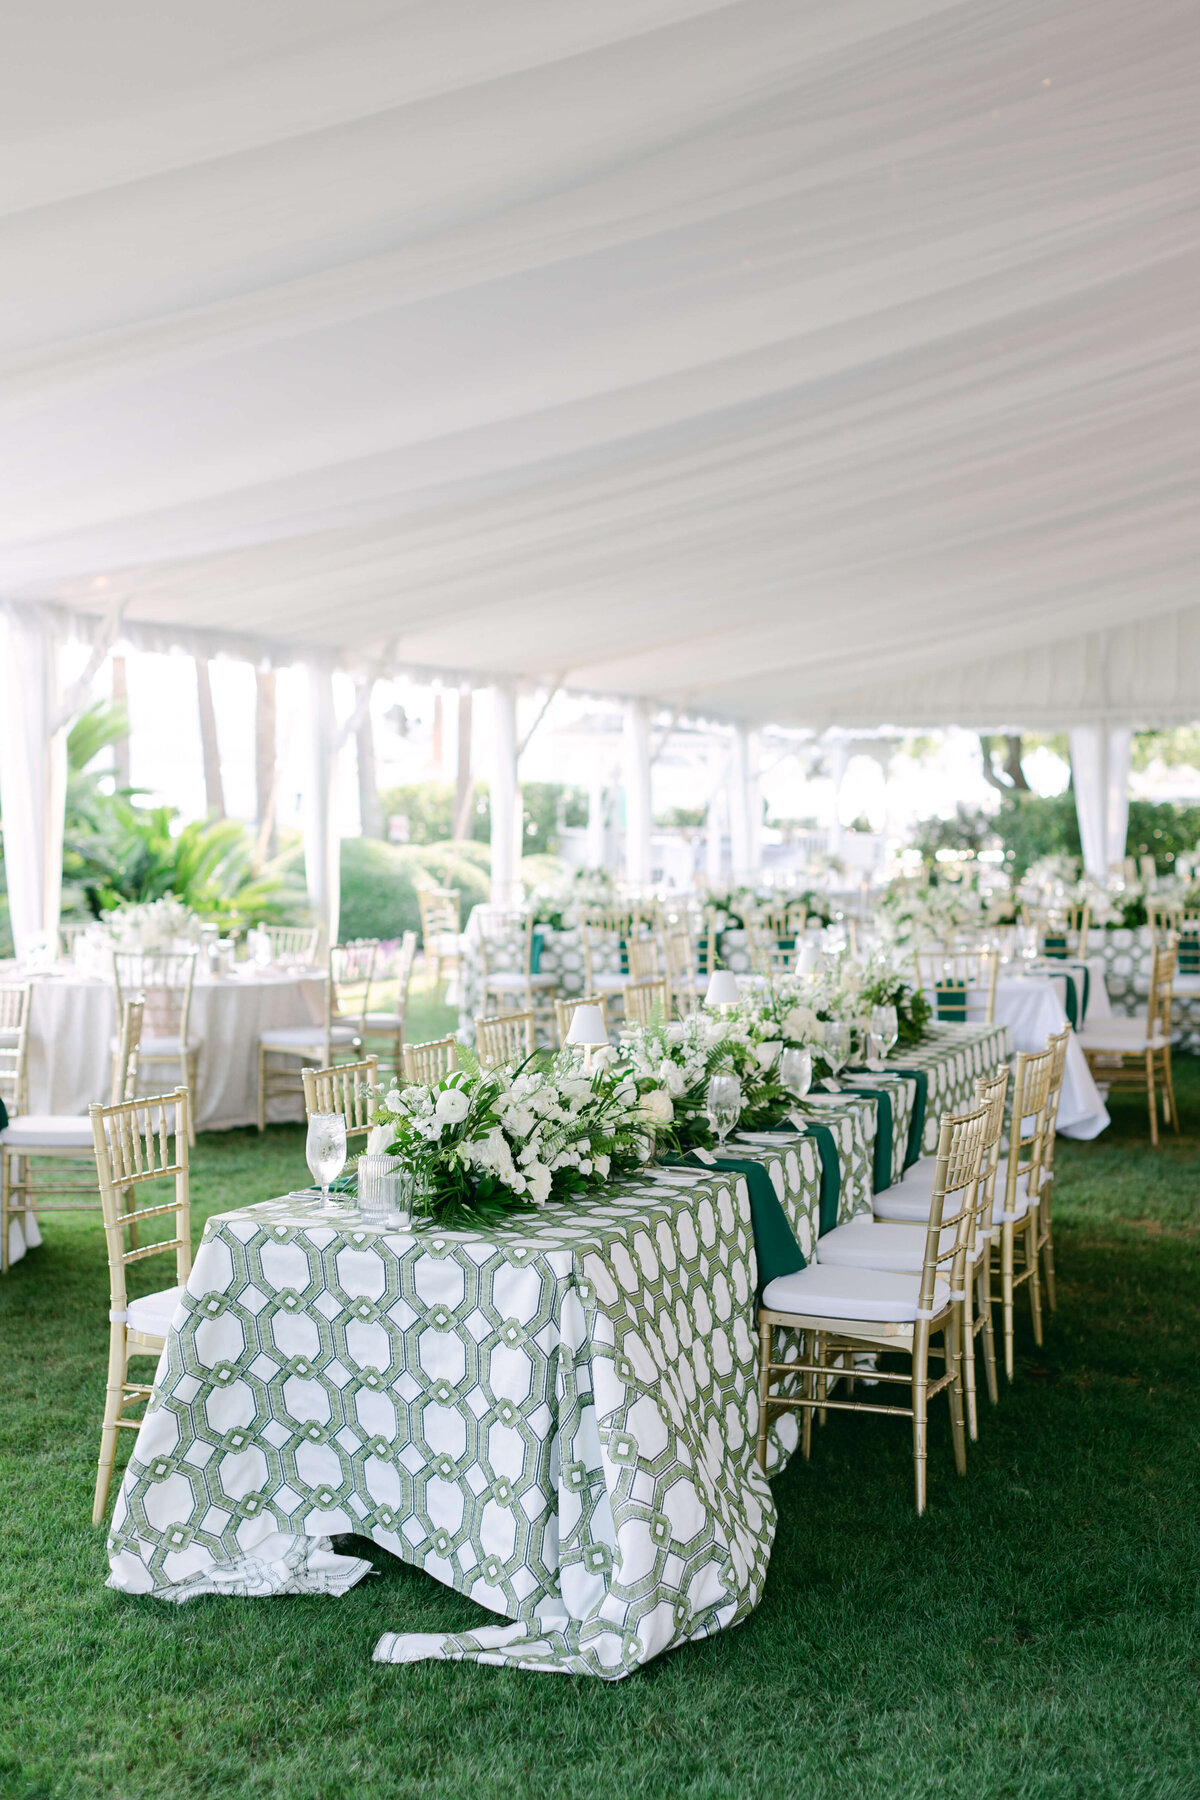 Tables and chairs sitting on soft green grass under a white tent.